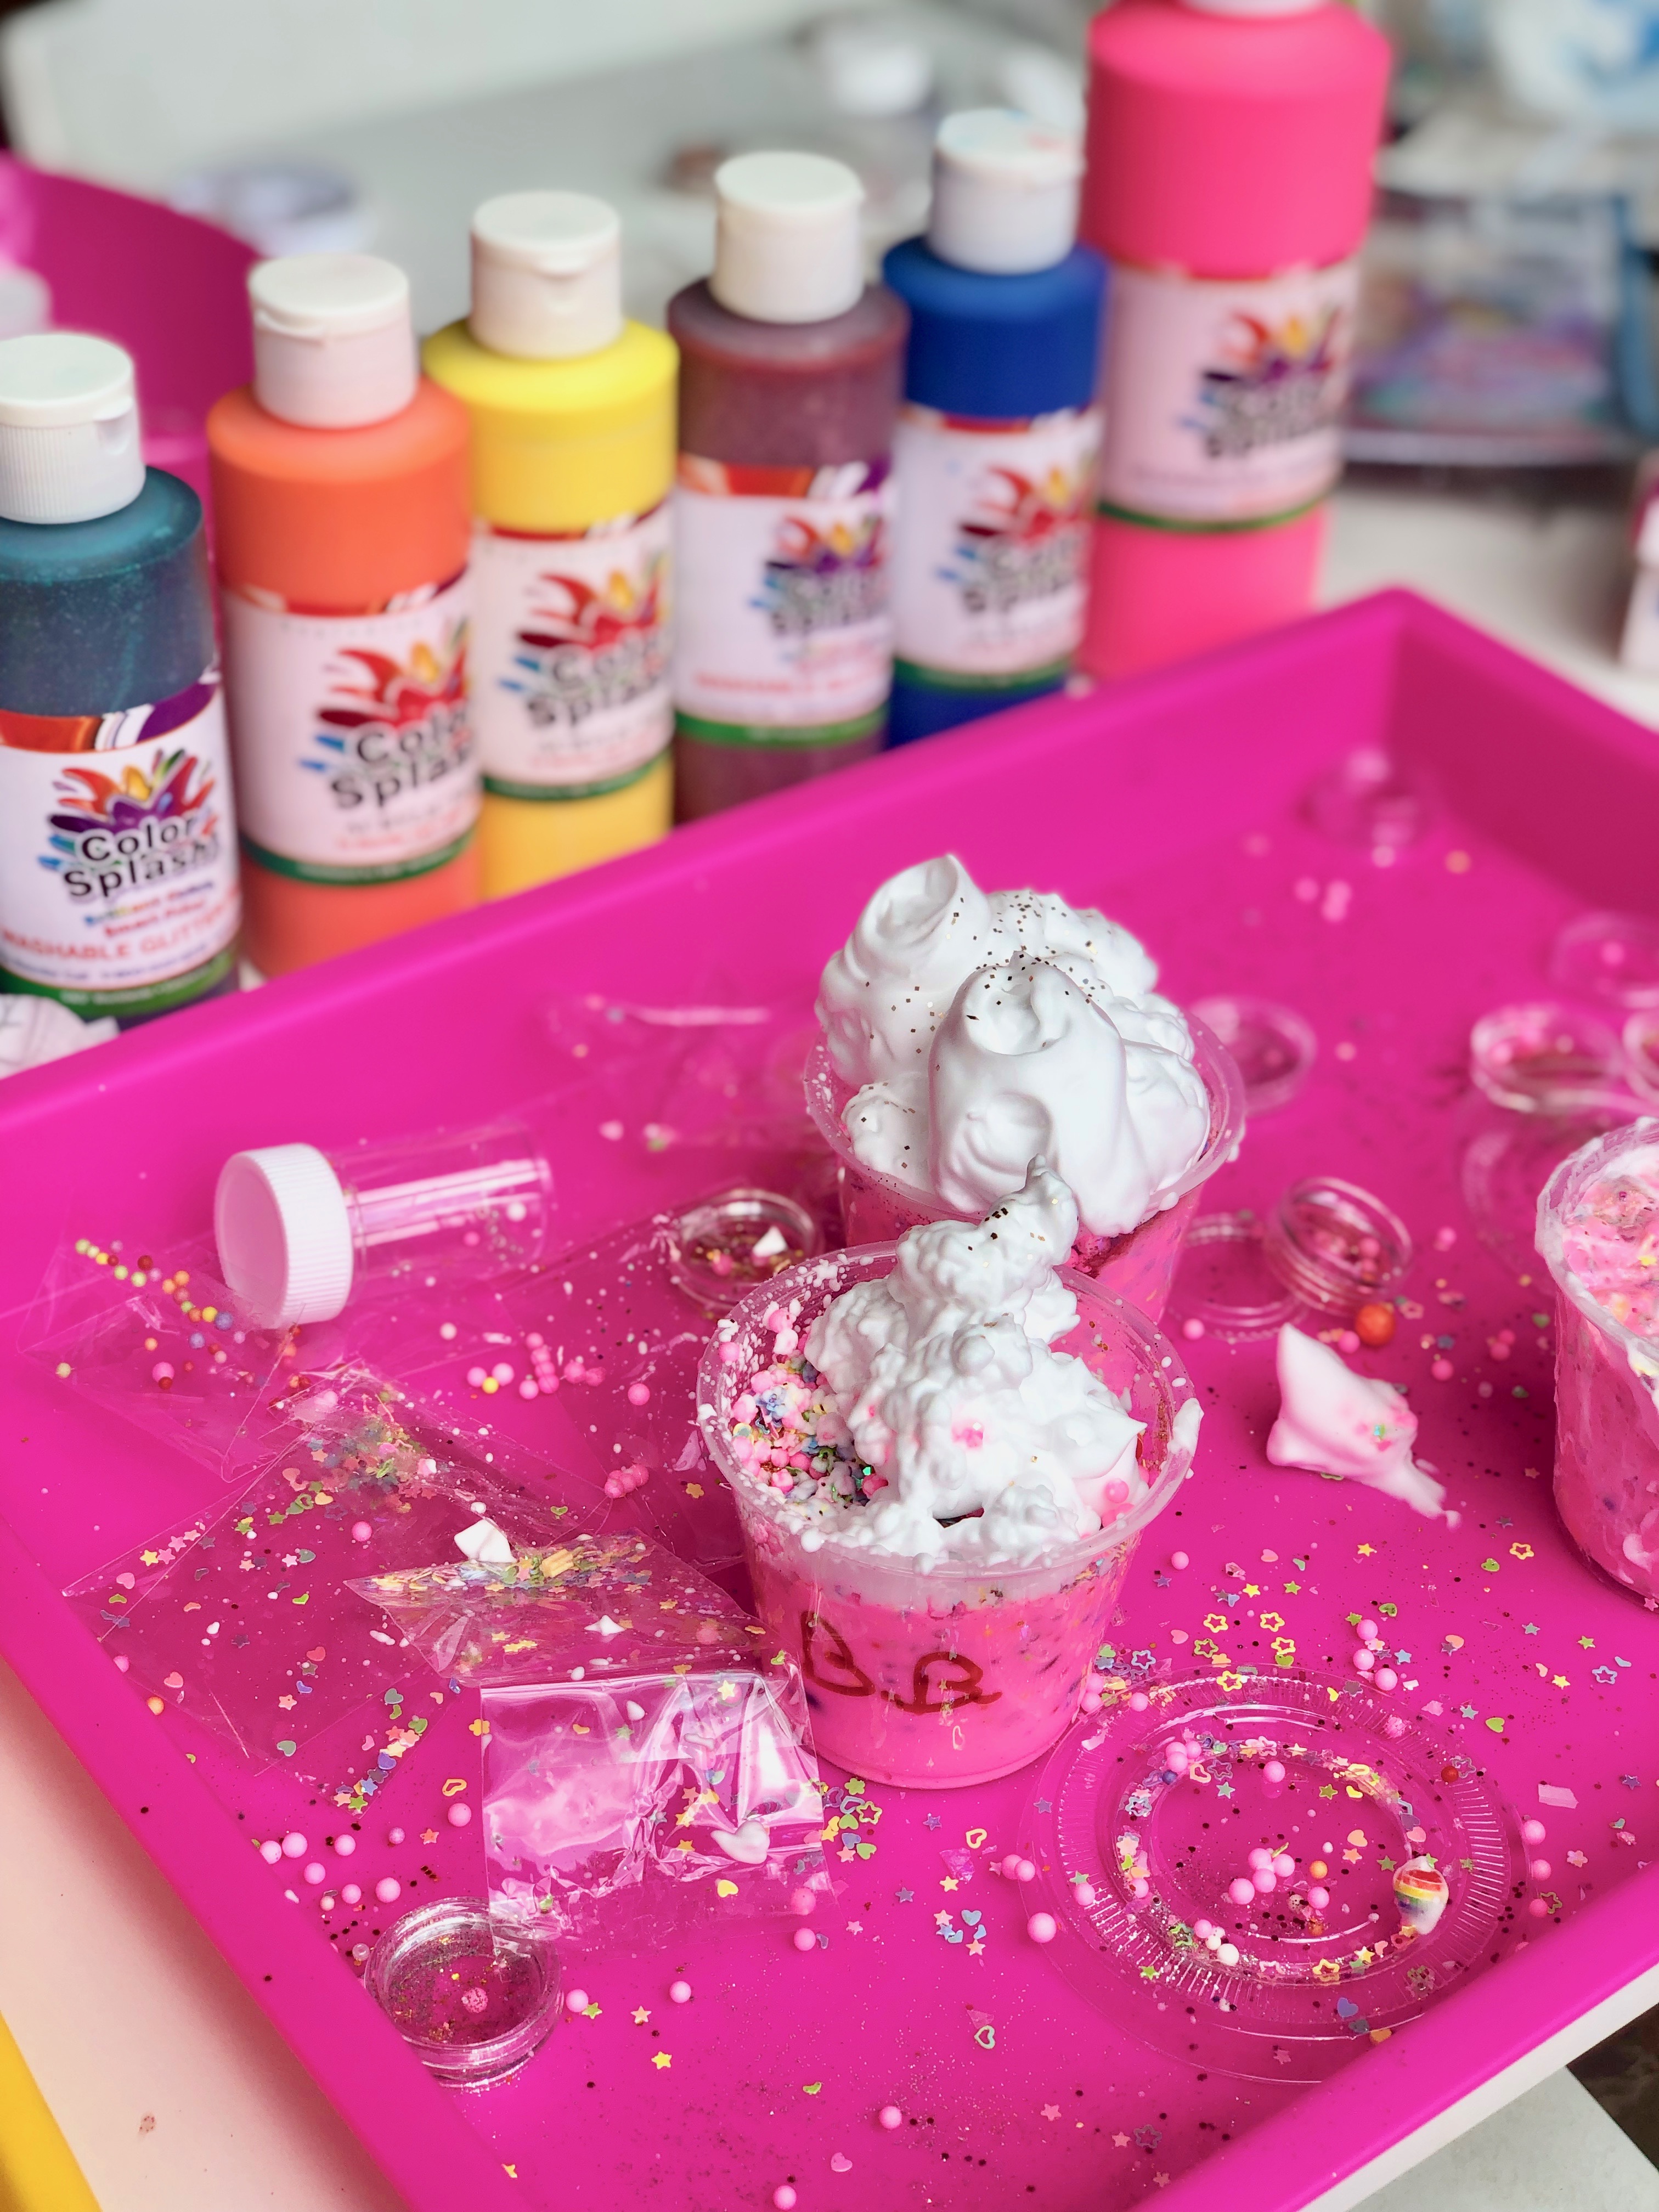 How to create slime with 3 year olds and avoid the worry of messes.